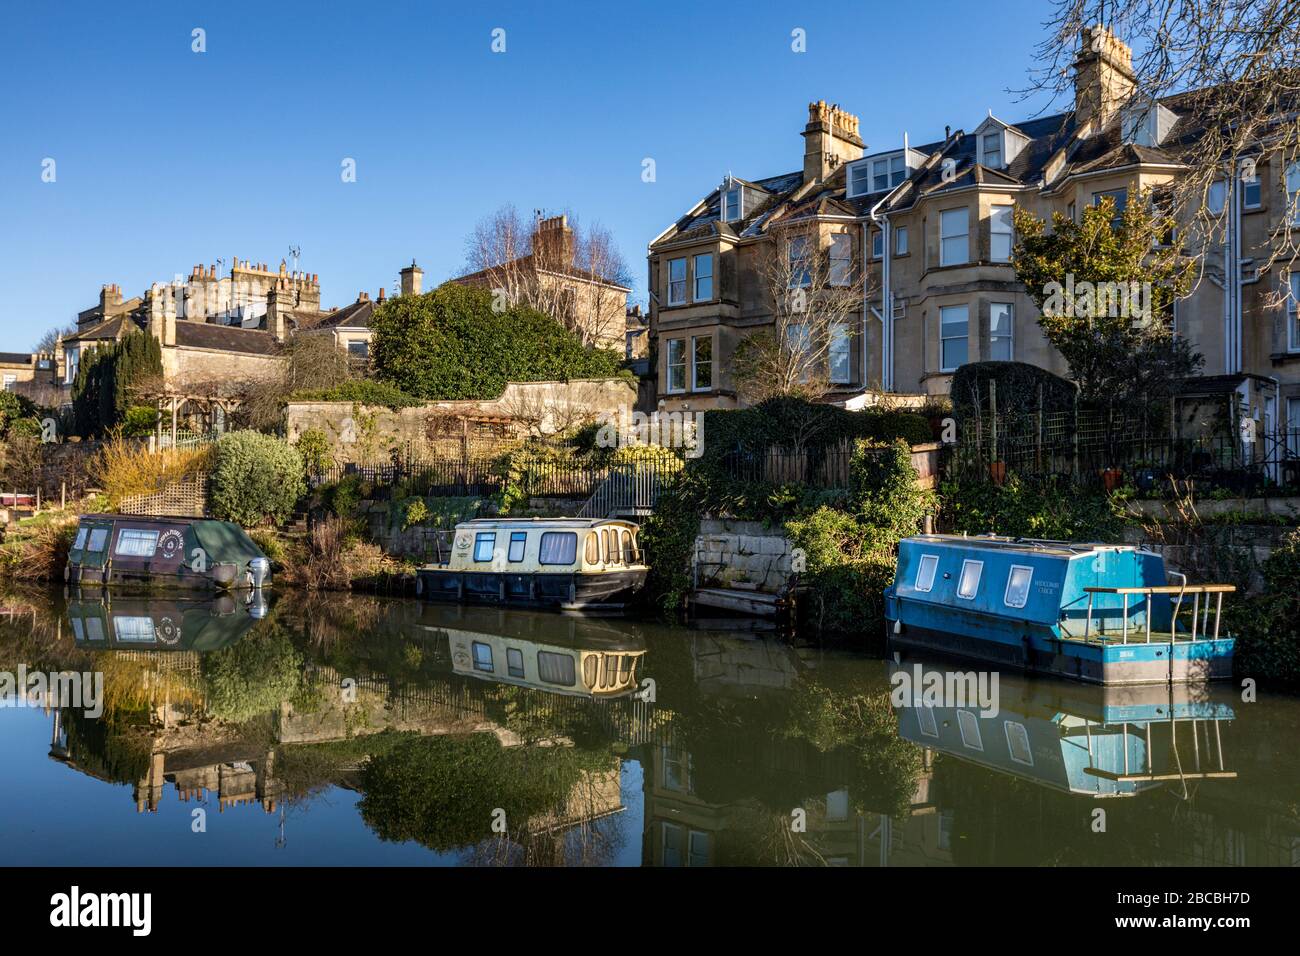 Three barges moored on the Kennet and Avon Canal, Bath Somerset Uk Stock Photo